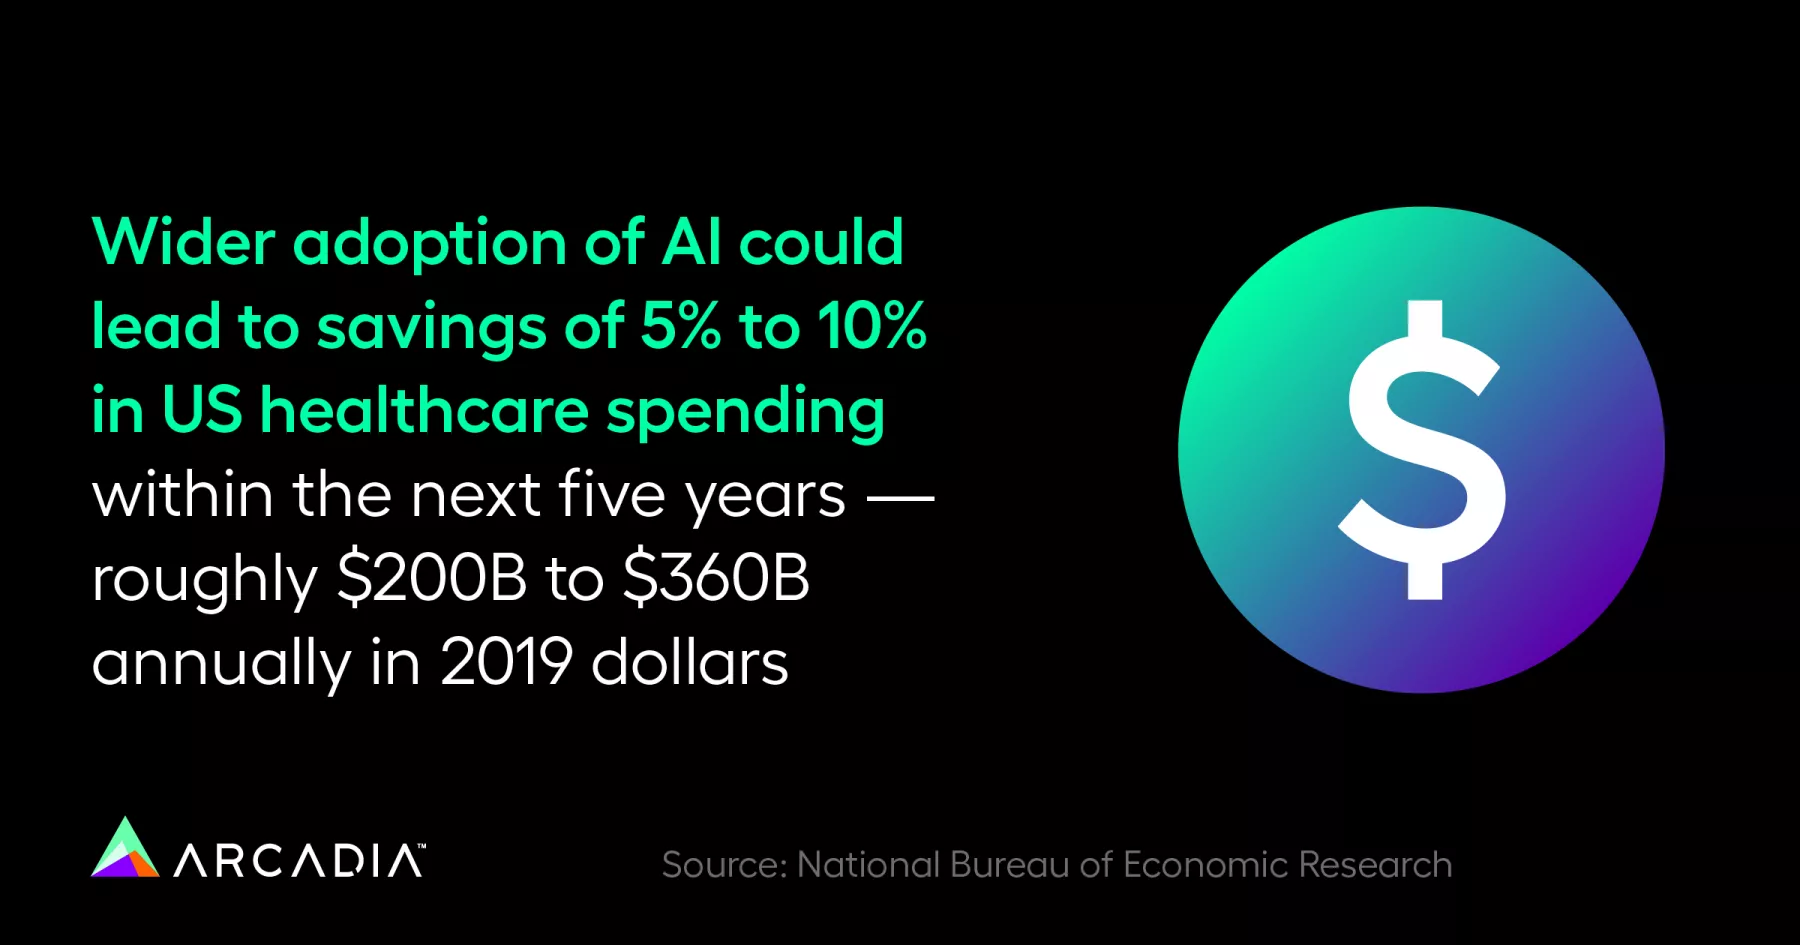 Wider adoption of AI could lead to savings of 5% to 10% in US healthcare spending within the next five years — roughly $200B to $360B annually in 2019 dollars.